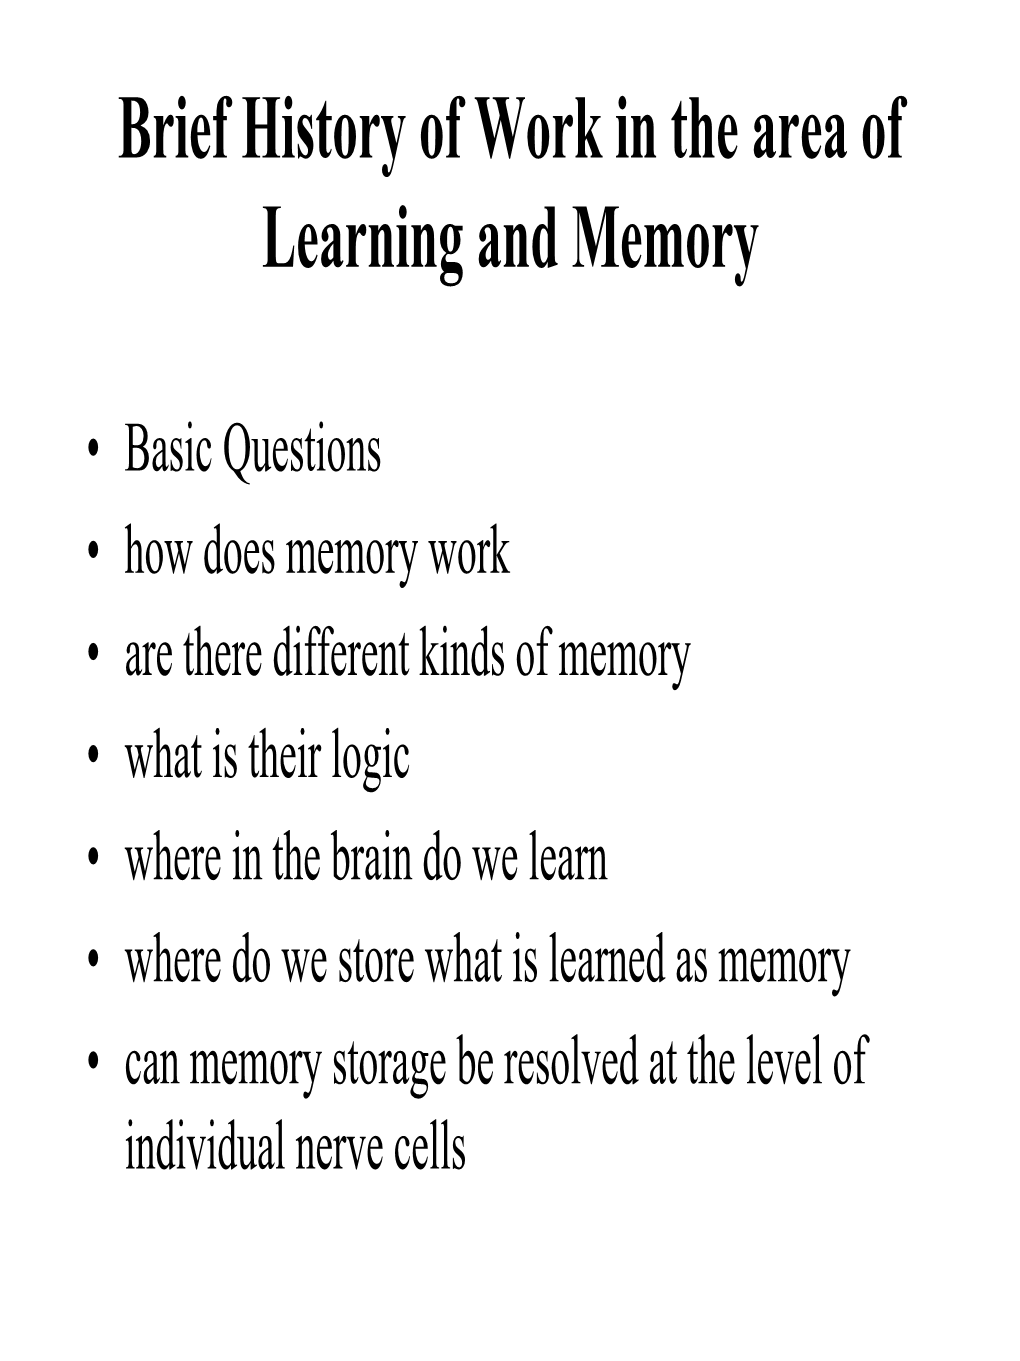 Brief History of Work in the Area of Learning and Memory